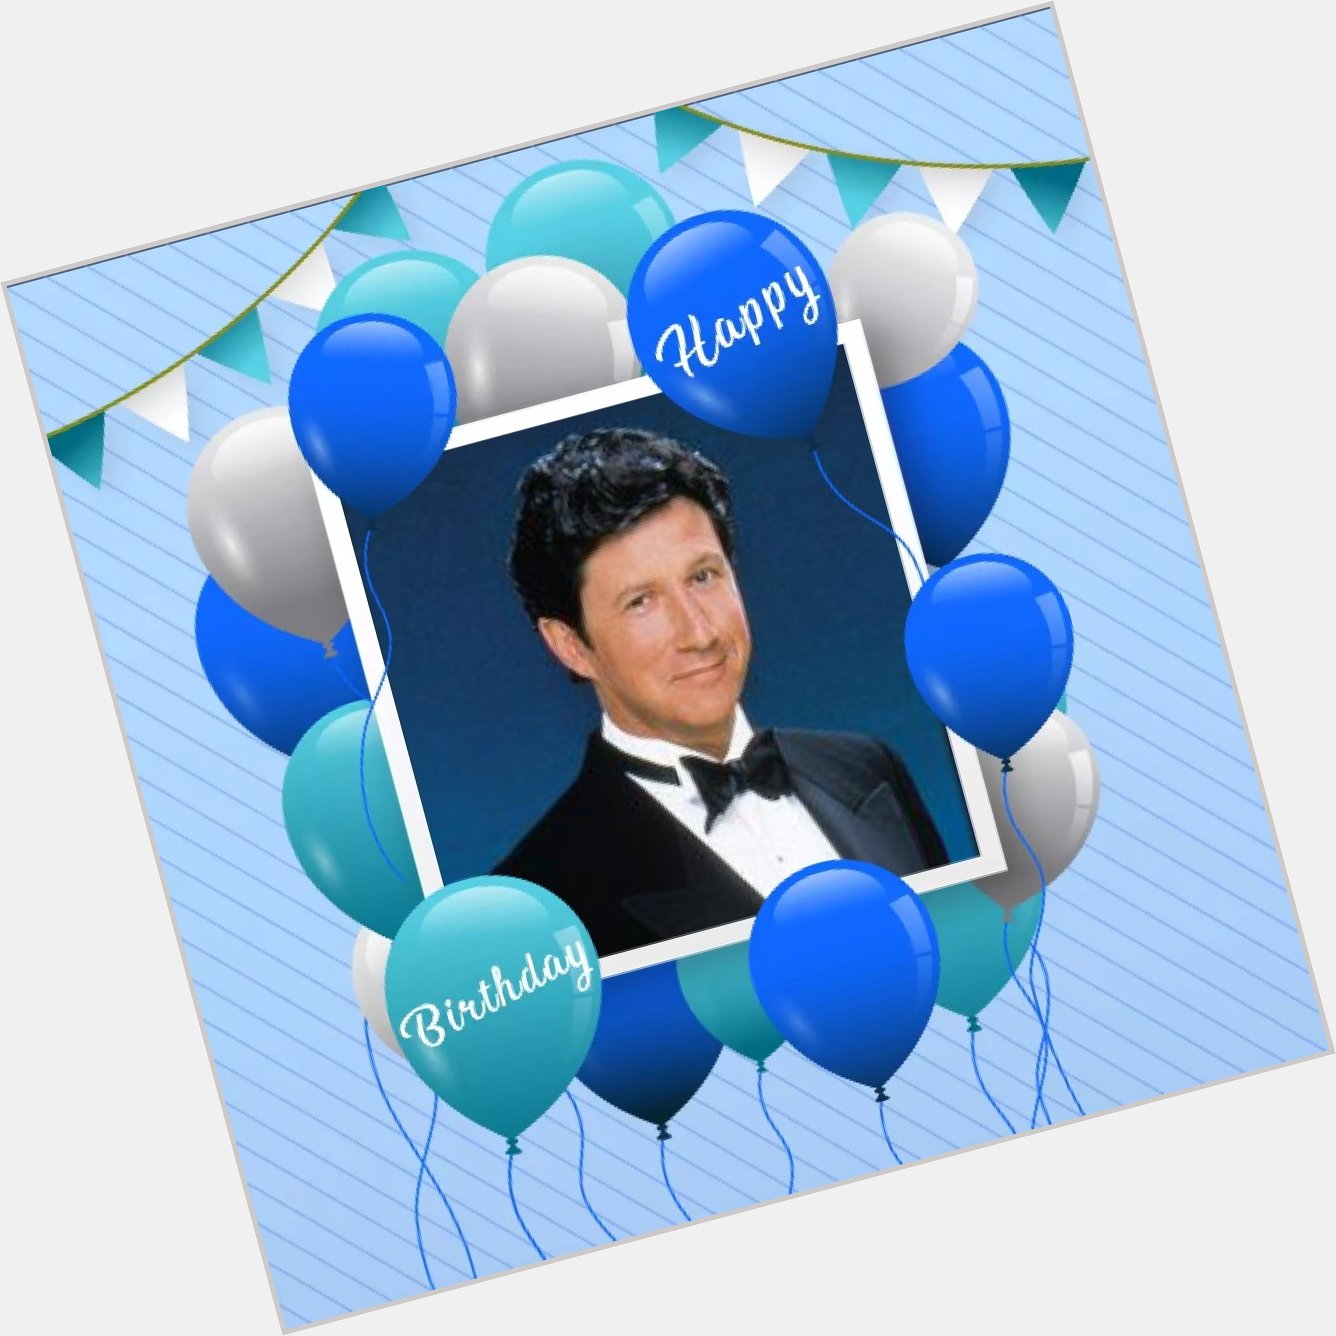 Happy Birthday Charles Shaughnessy! Hope you have a wonderful day       